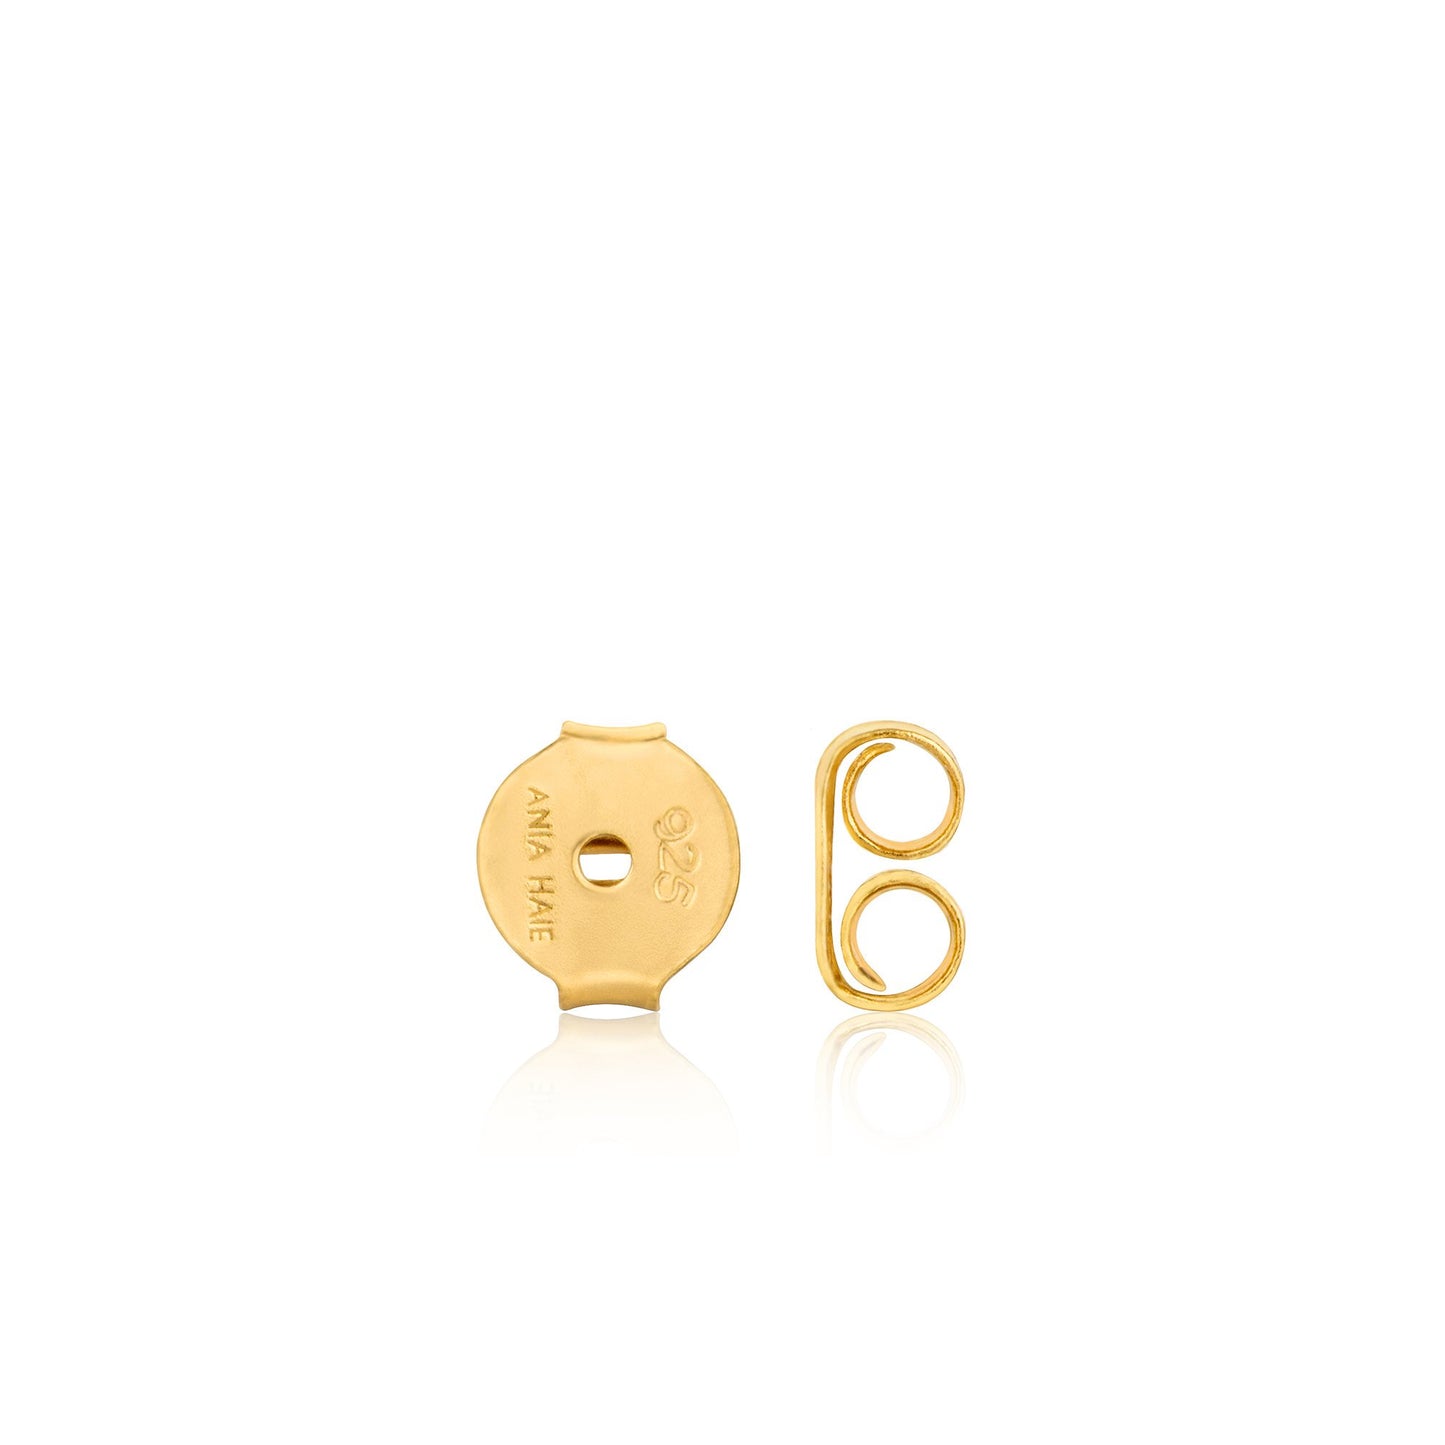 ANIA HAIE ANIA HAIE - Gold Modern Hoop Earrings available at The Good Life Boutique